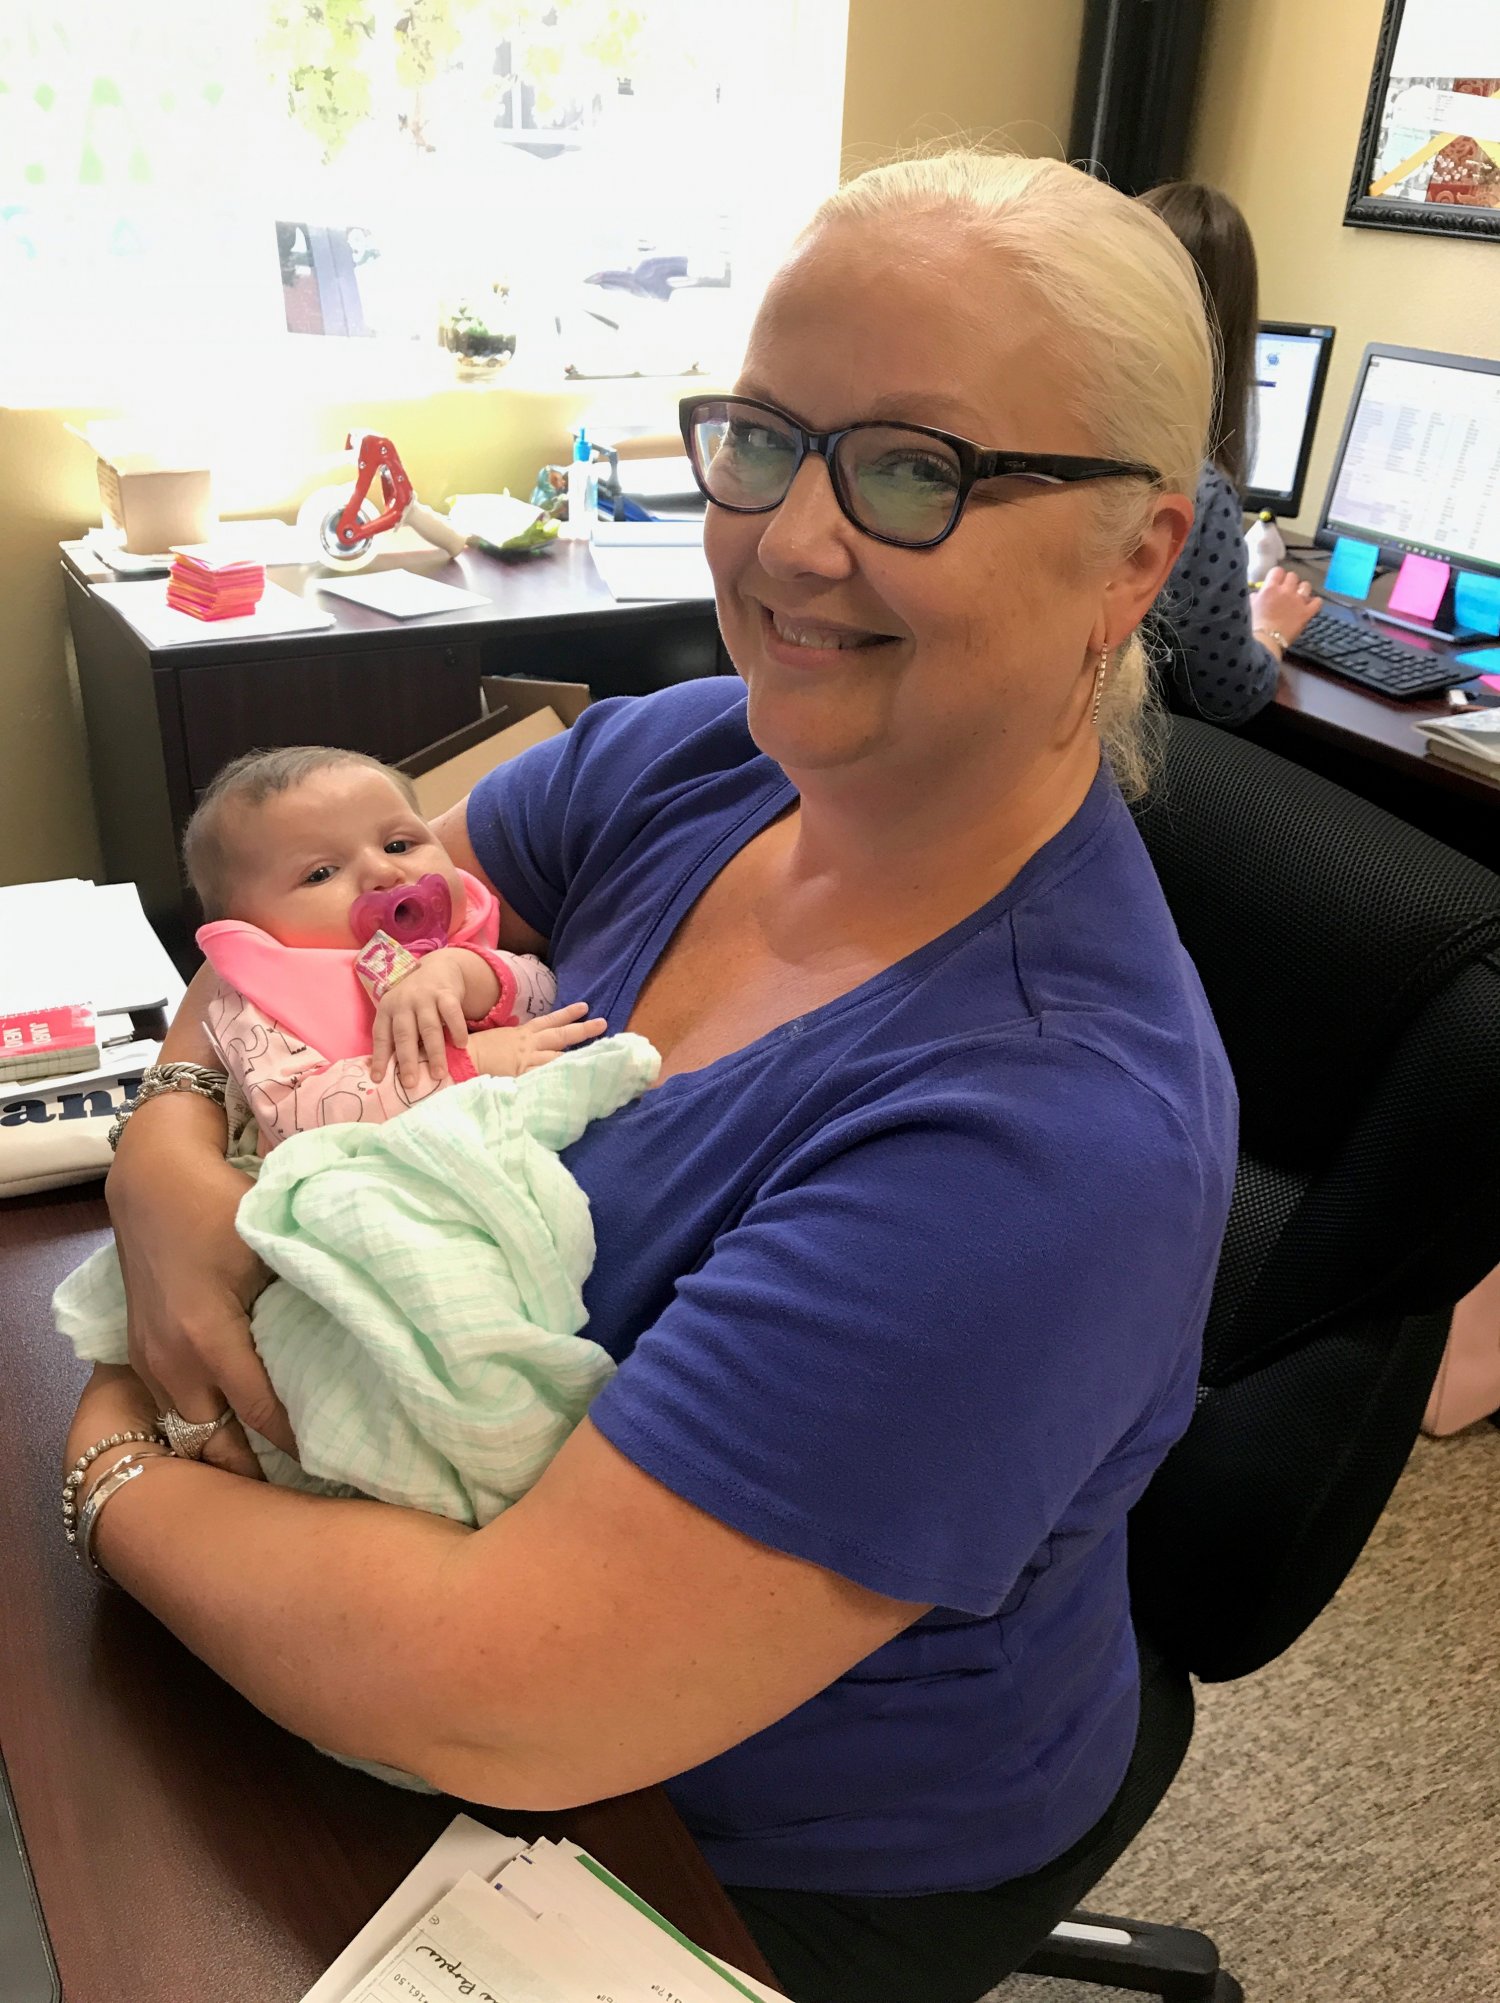 Woman holding baby in office